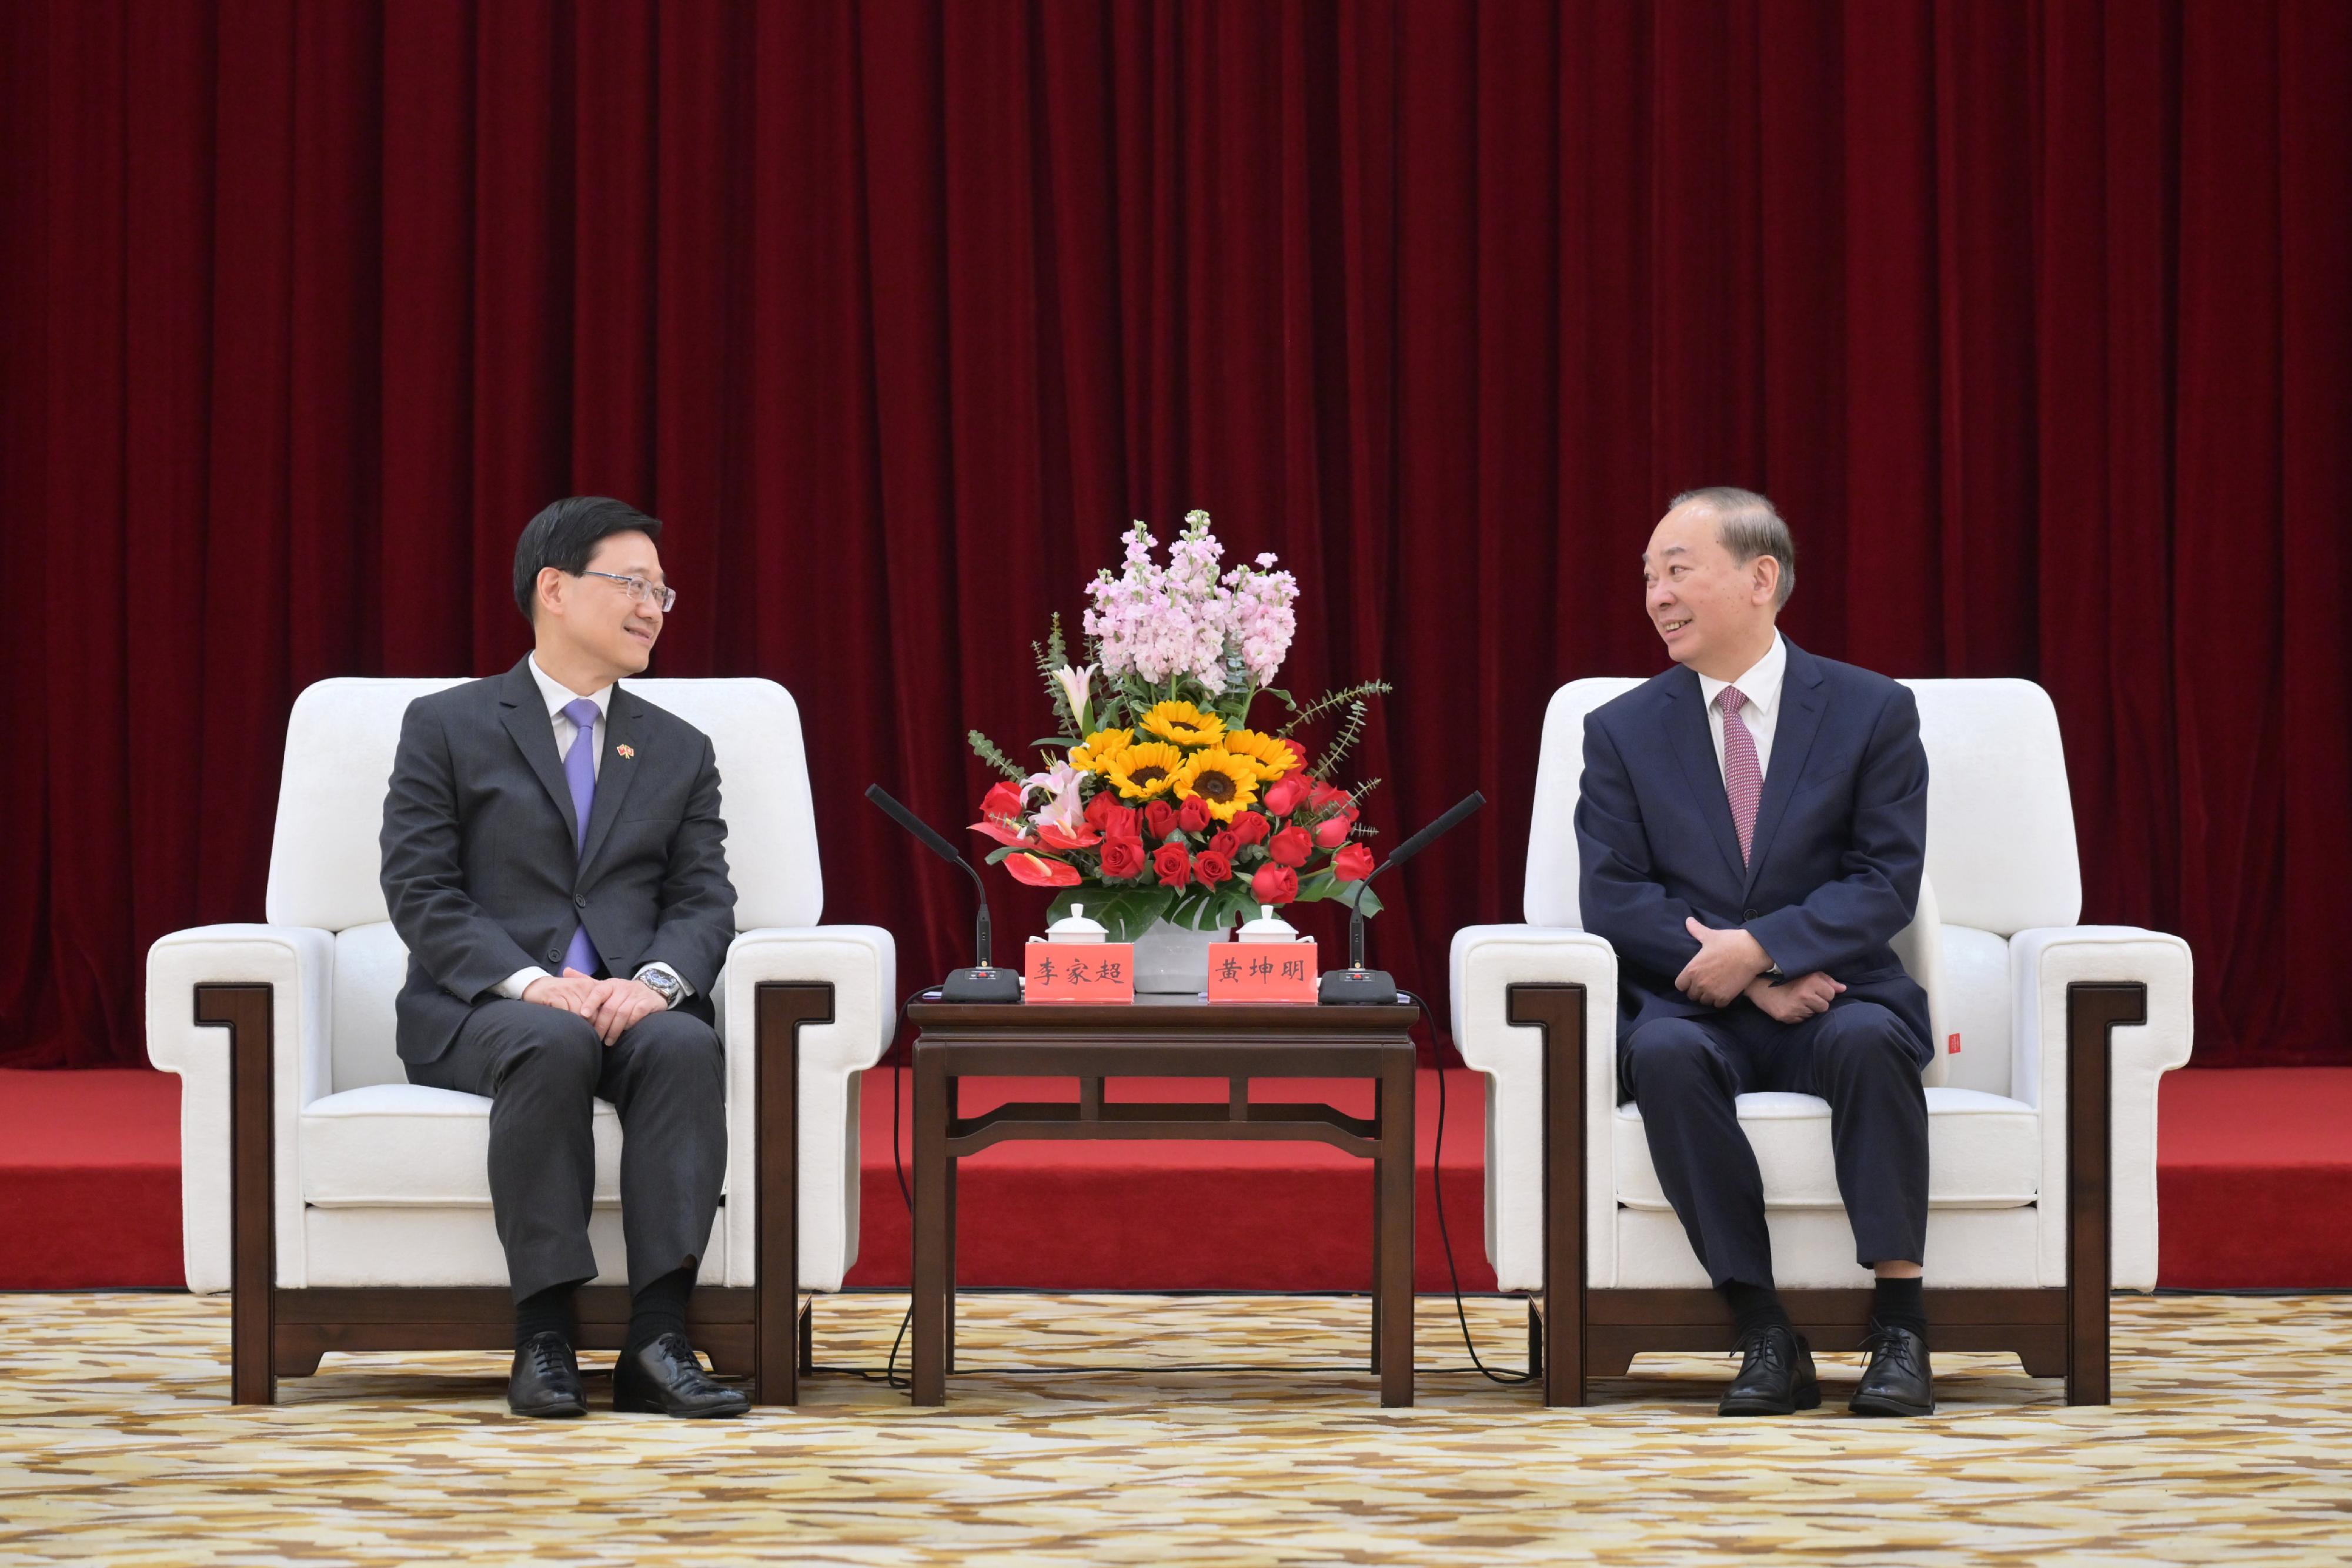 The Chief Executive, Mr John Lee, led a delegation of the Hong Kong Special Administrative Region Government and the Legislative Council to visit Guangzhou today (April 24). Photo shows Mr Lee (left) meeting with the Secretary of the CPC Guangdong Provincial Committee, Mr Huang Kunming (right), in Guangzhou.